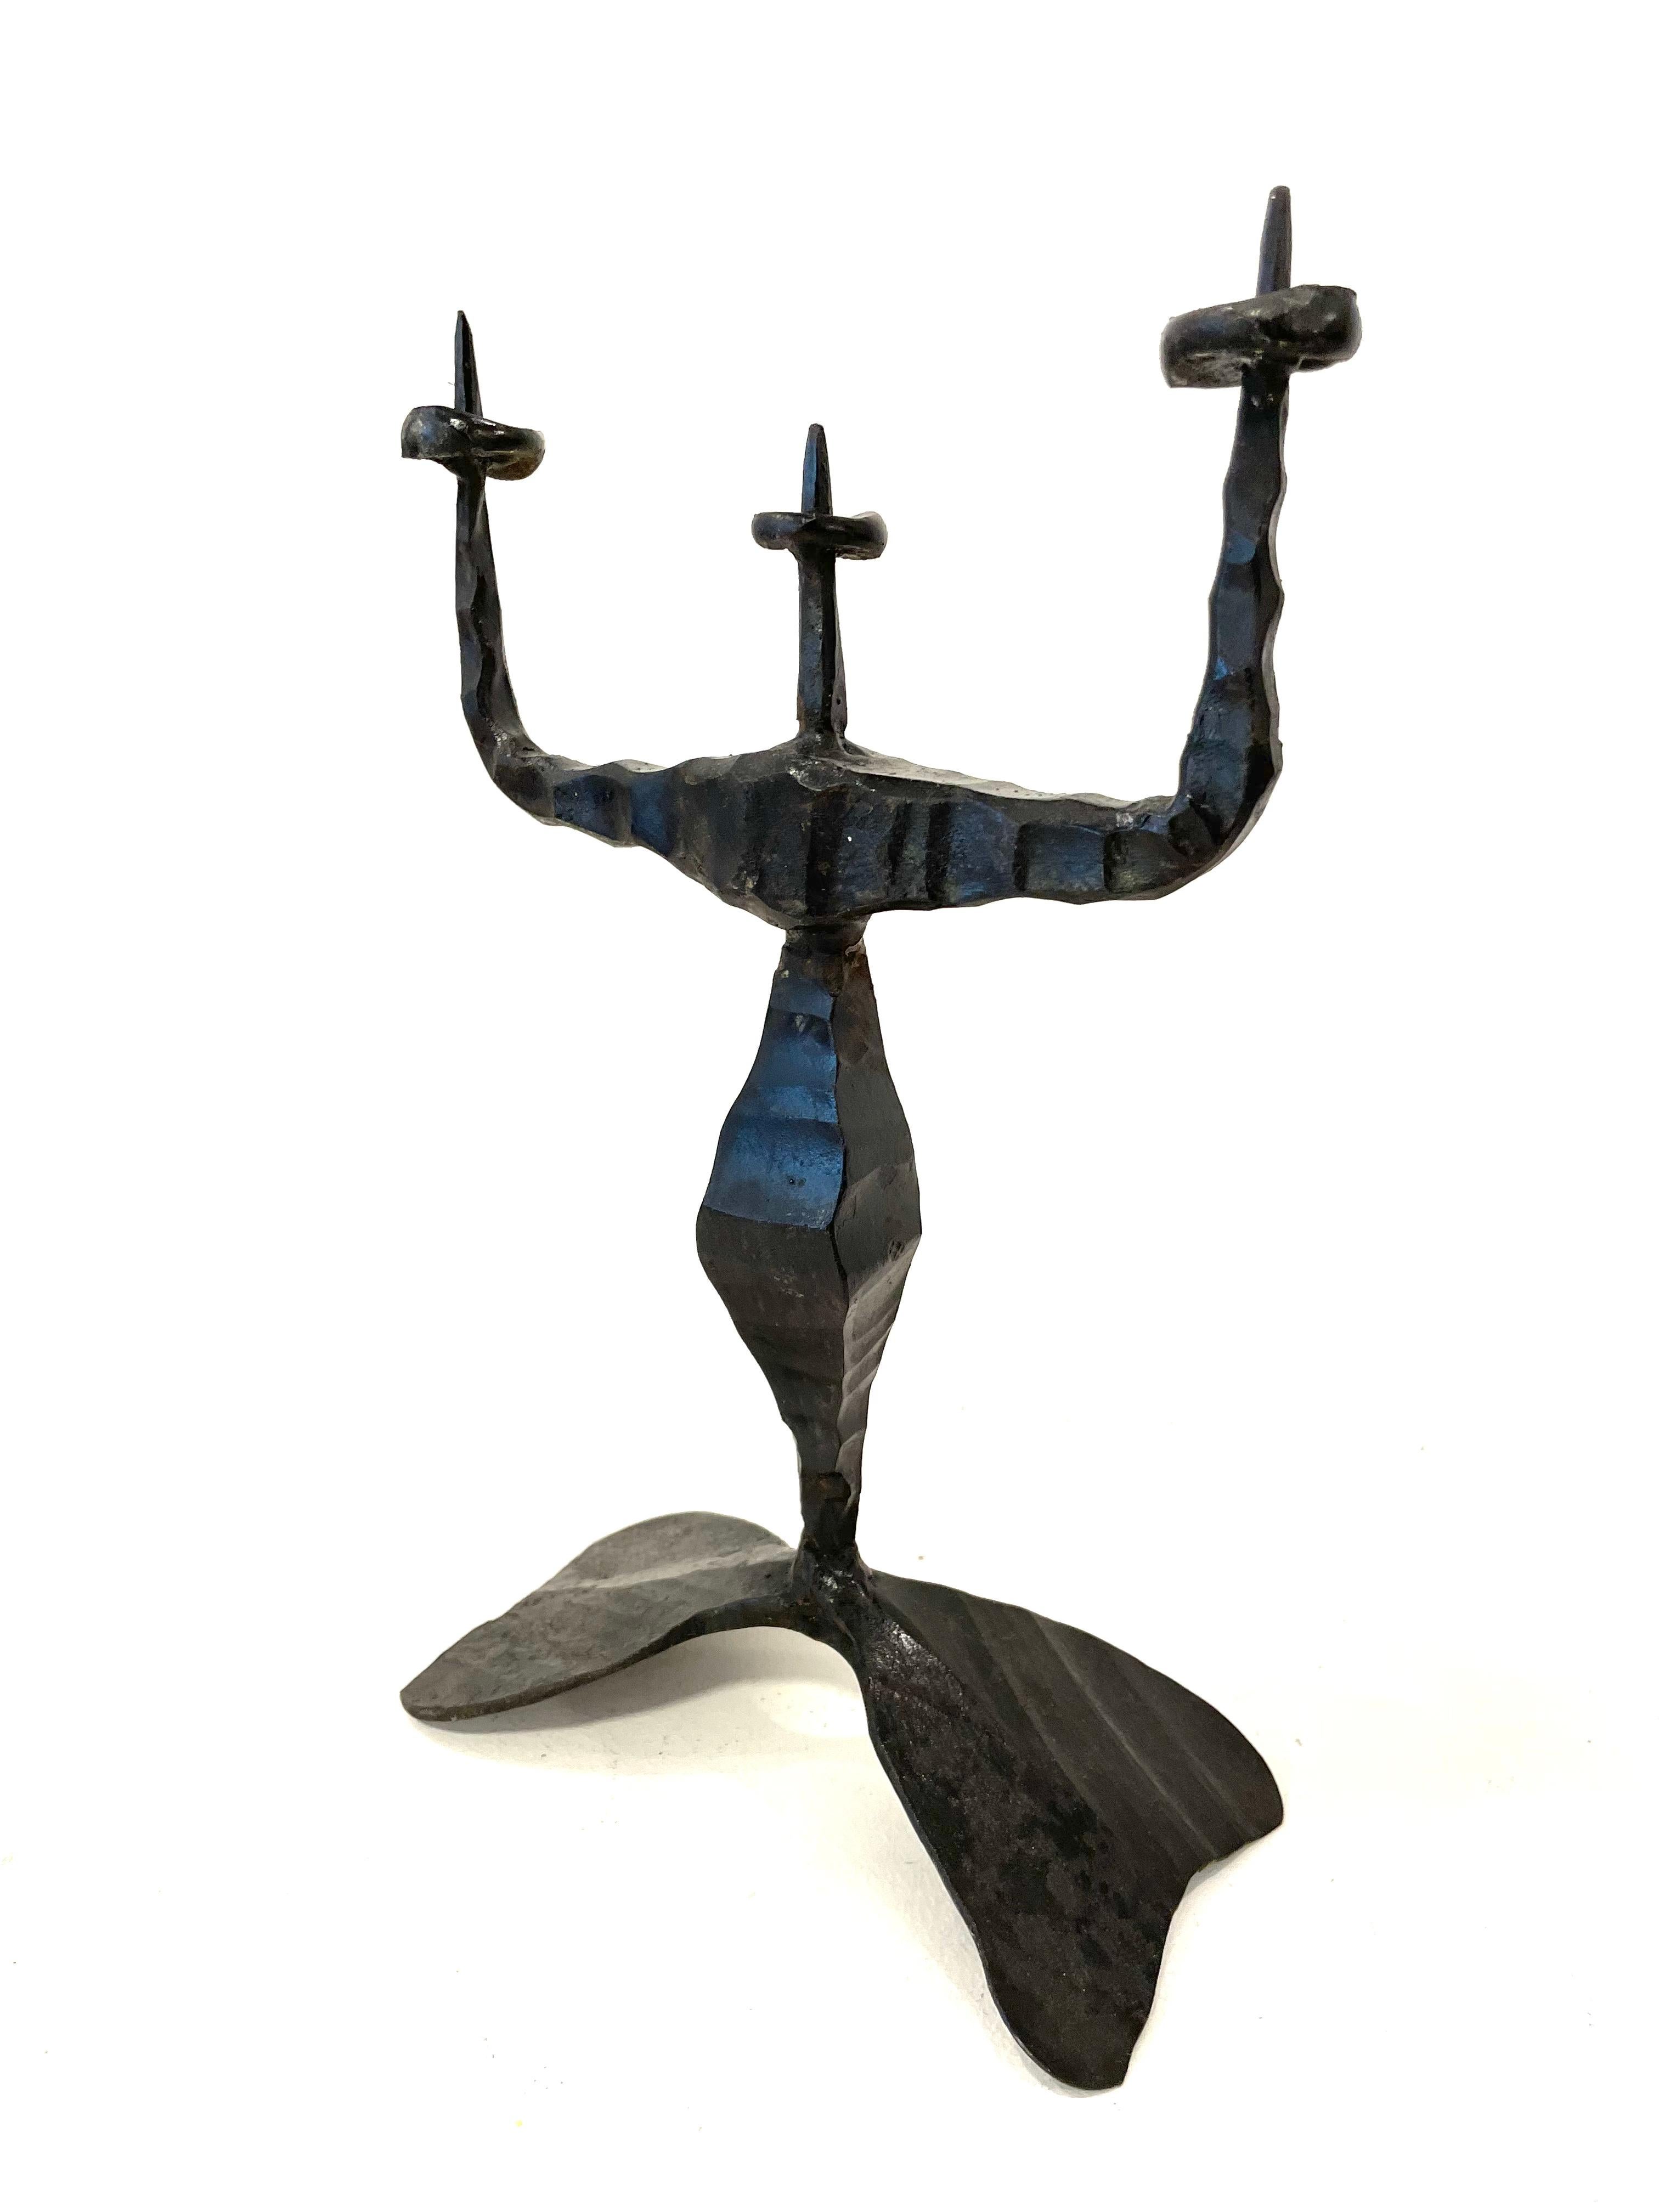 Hand-Crafted Mid-20th Century Israeli Brutalist Iron Candlesticks  by David Palombo For Sale